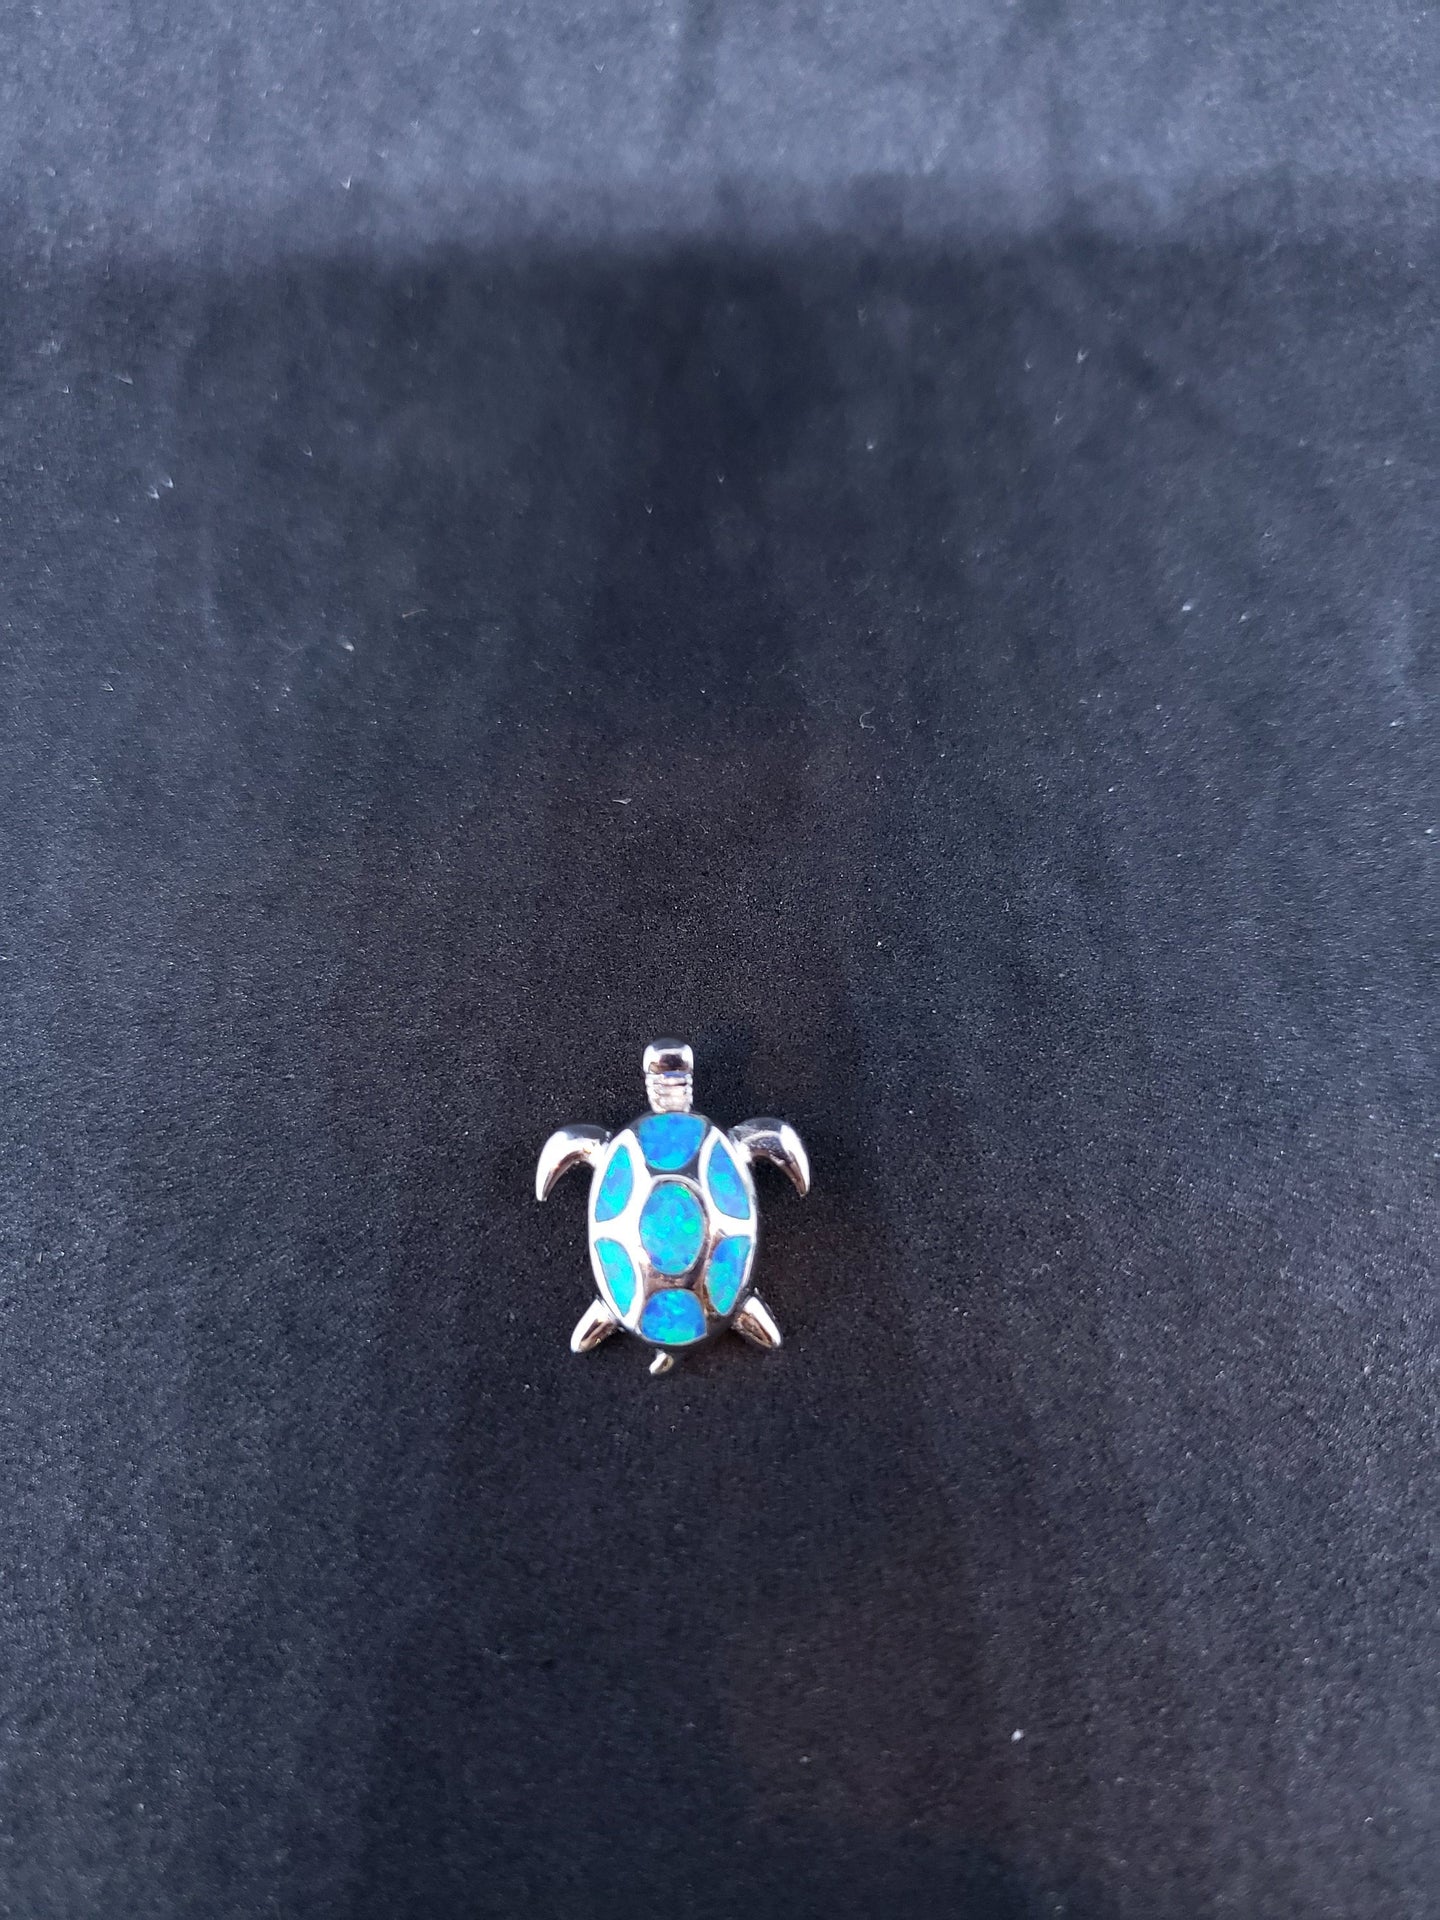 small turtle Inlay blue fire opal sterling silver pendant